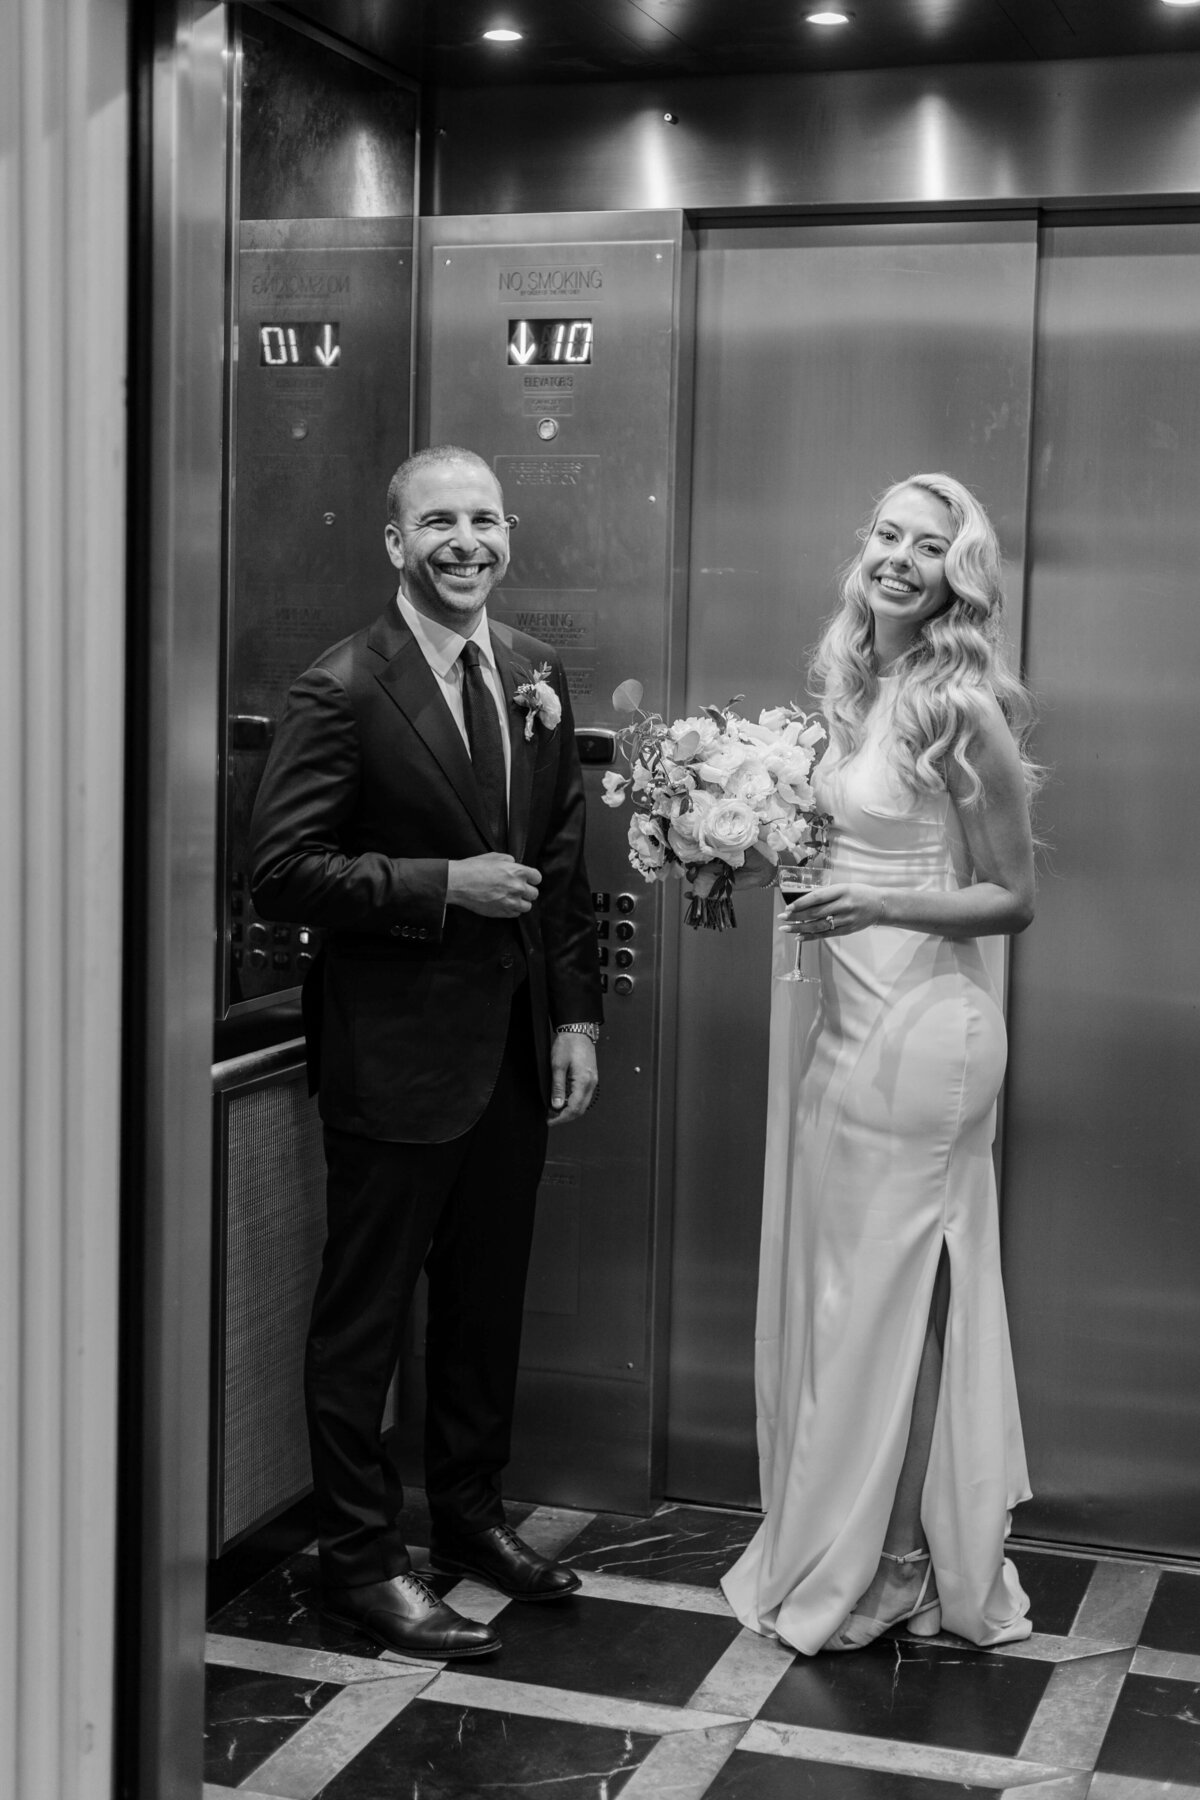 A bride and groom smile in an elevator.